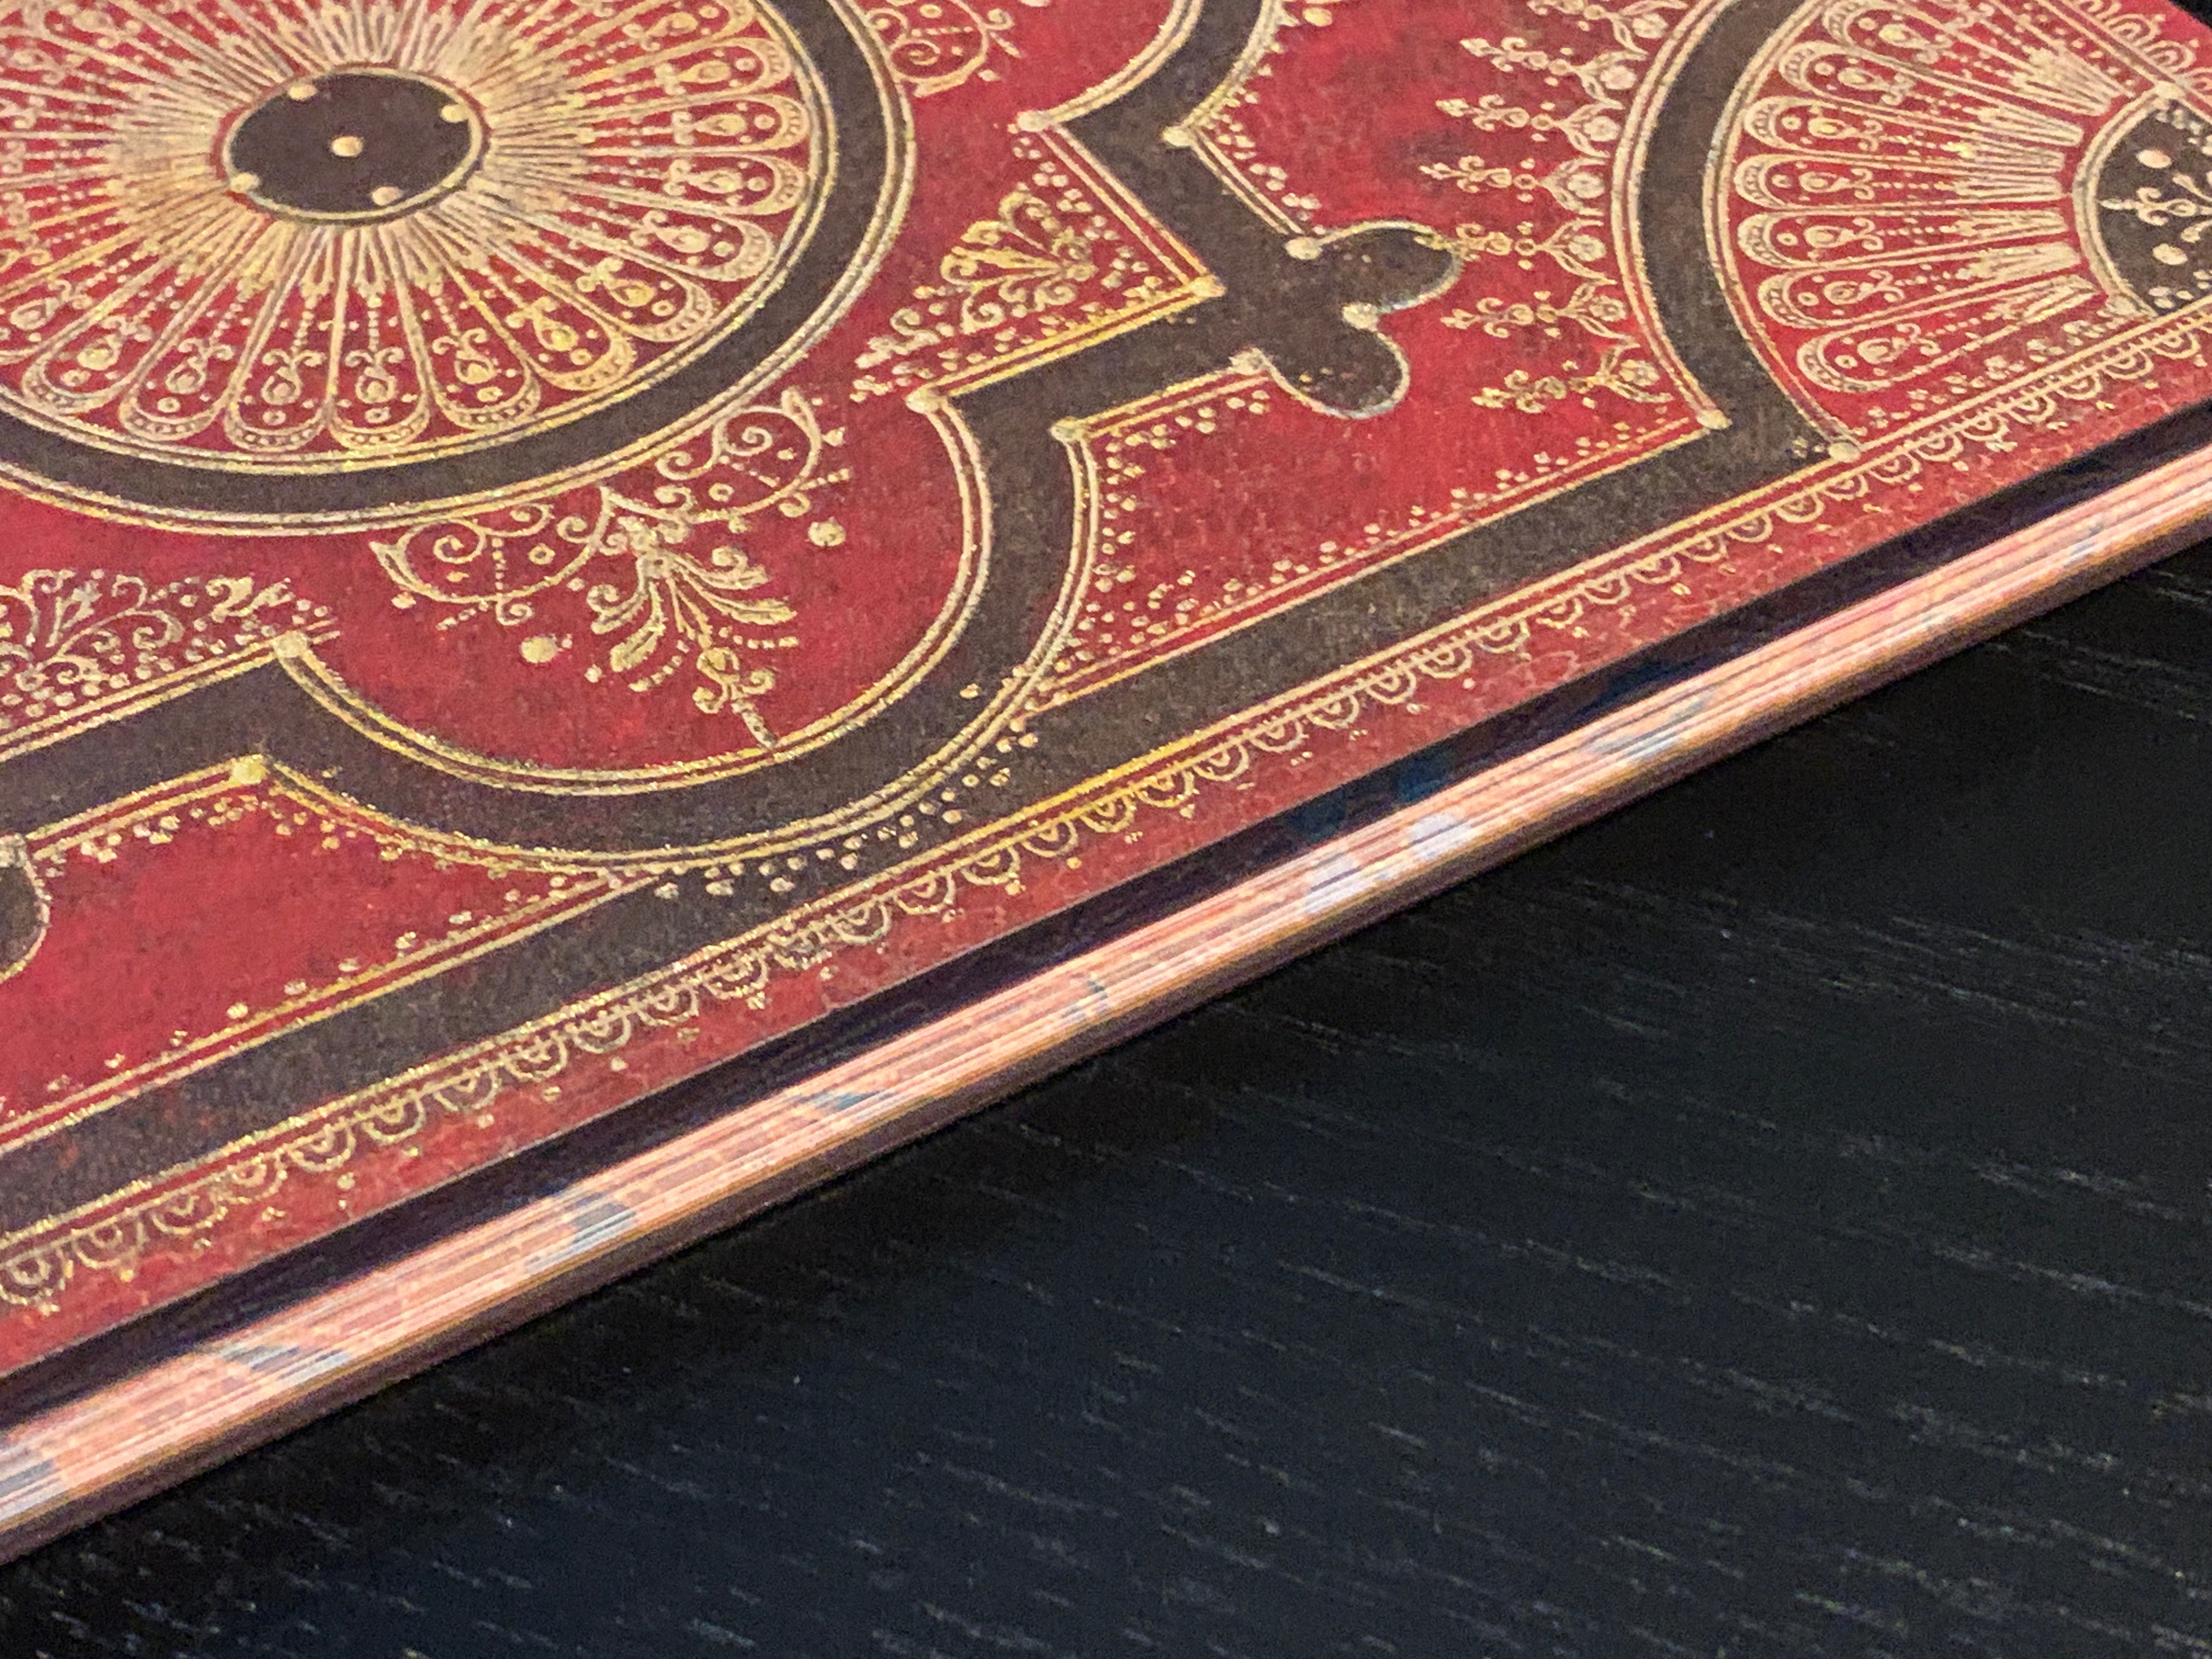 Ventaglio Rosso, Flexi Softbound Journal with Gilt Accents, Lined, Paperblanks, 9in x 7in